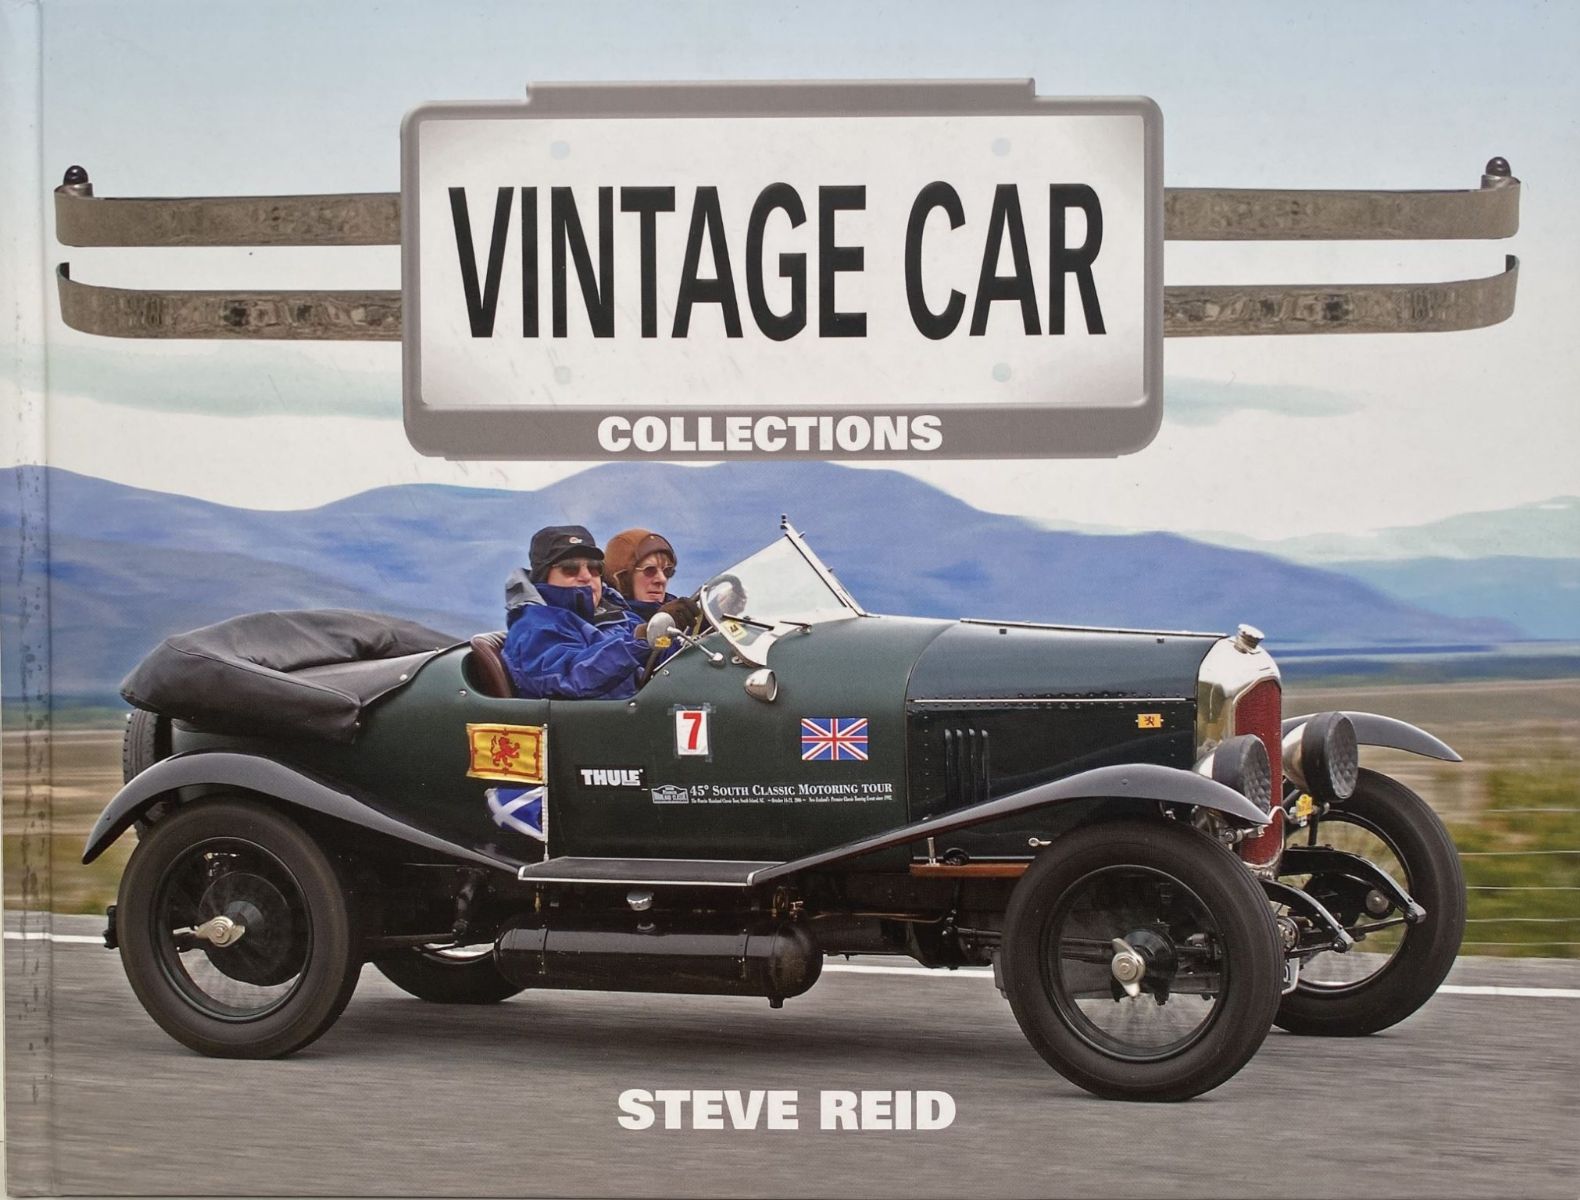 VINTAGE CAR COLLECTIONS